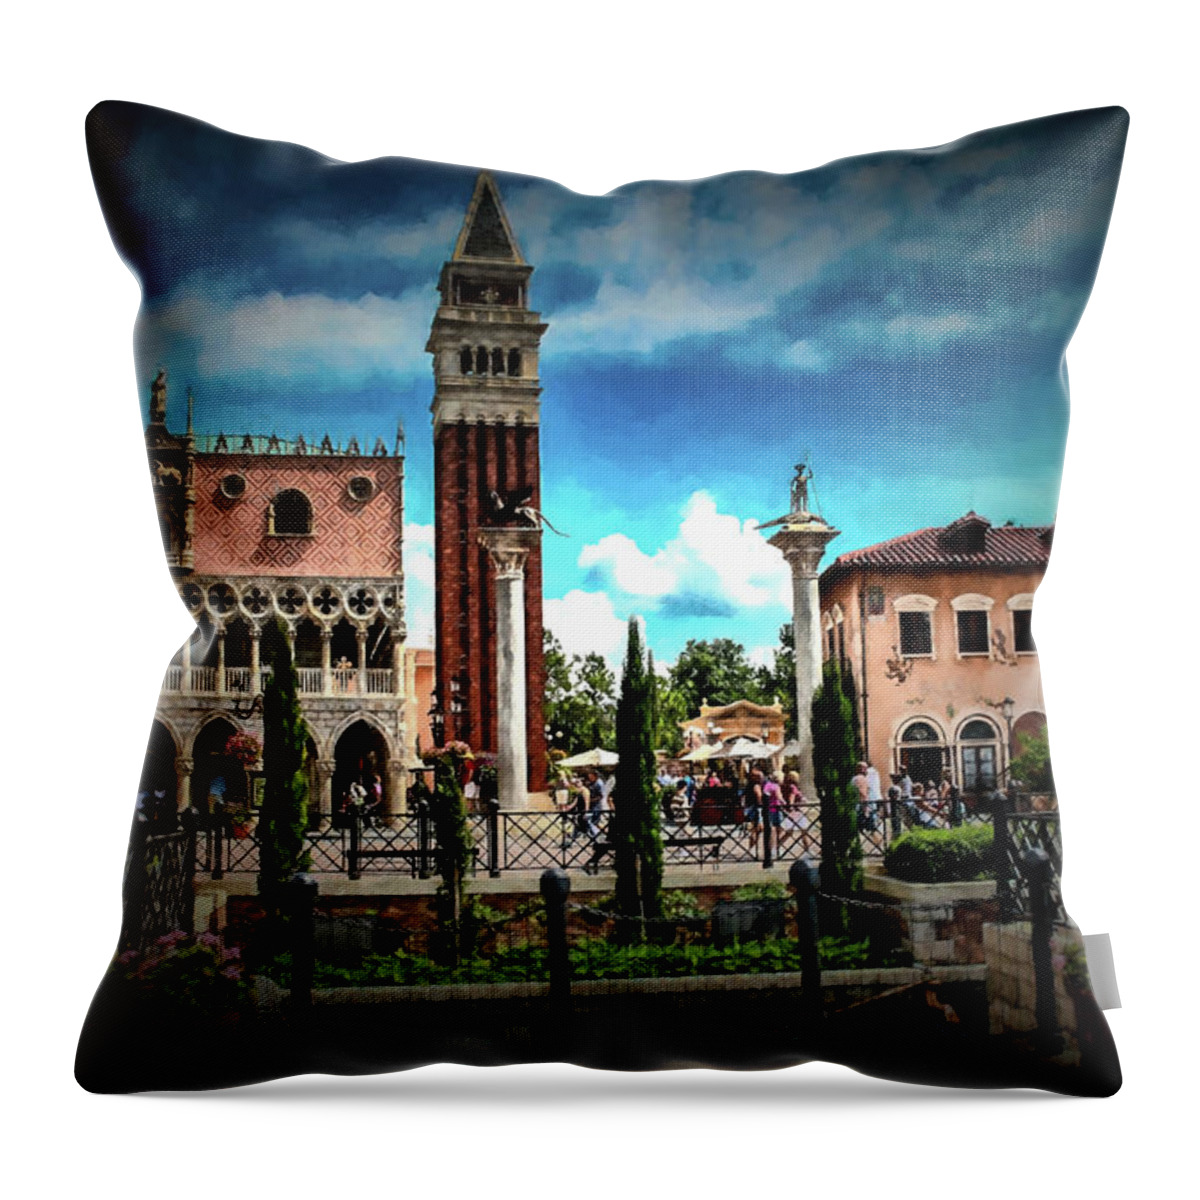 Lake Buena Vista Throw Pillow featuring the photograph Italy World Showcase Epcot by Tommy Anderson